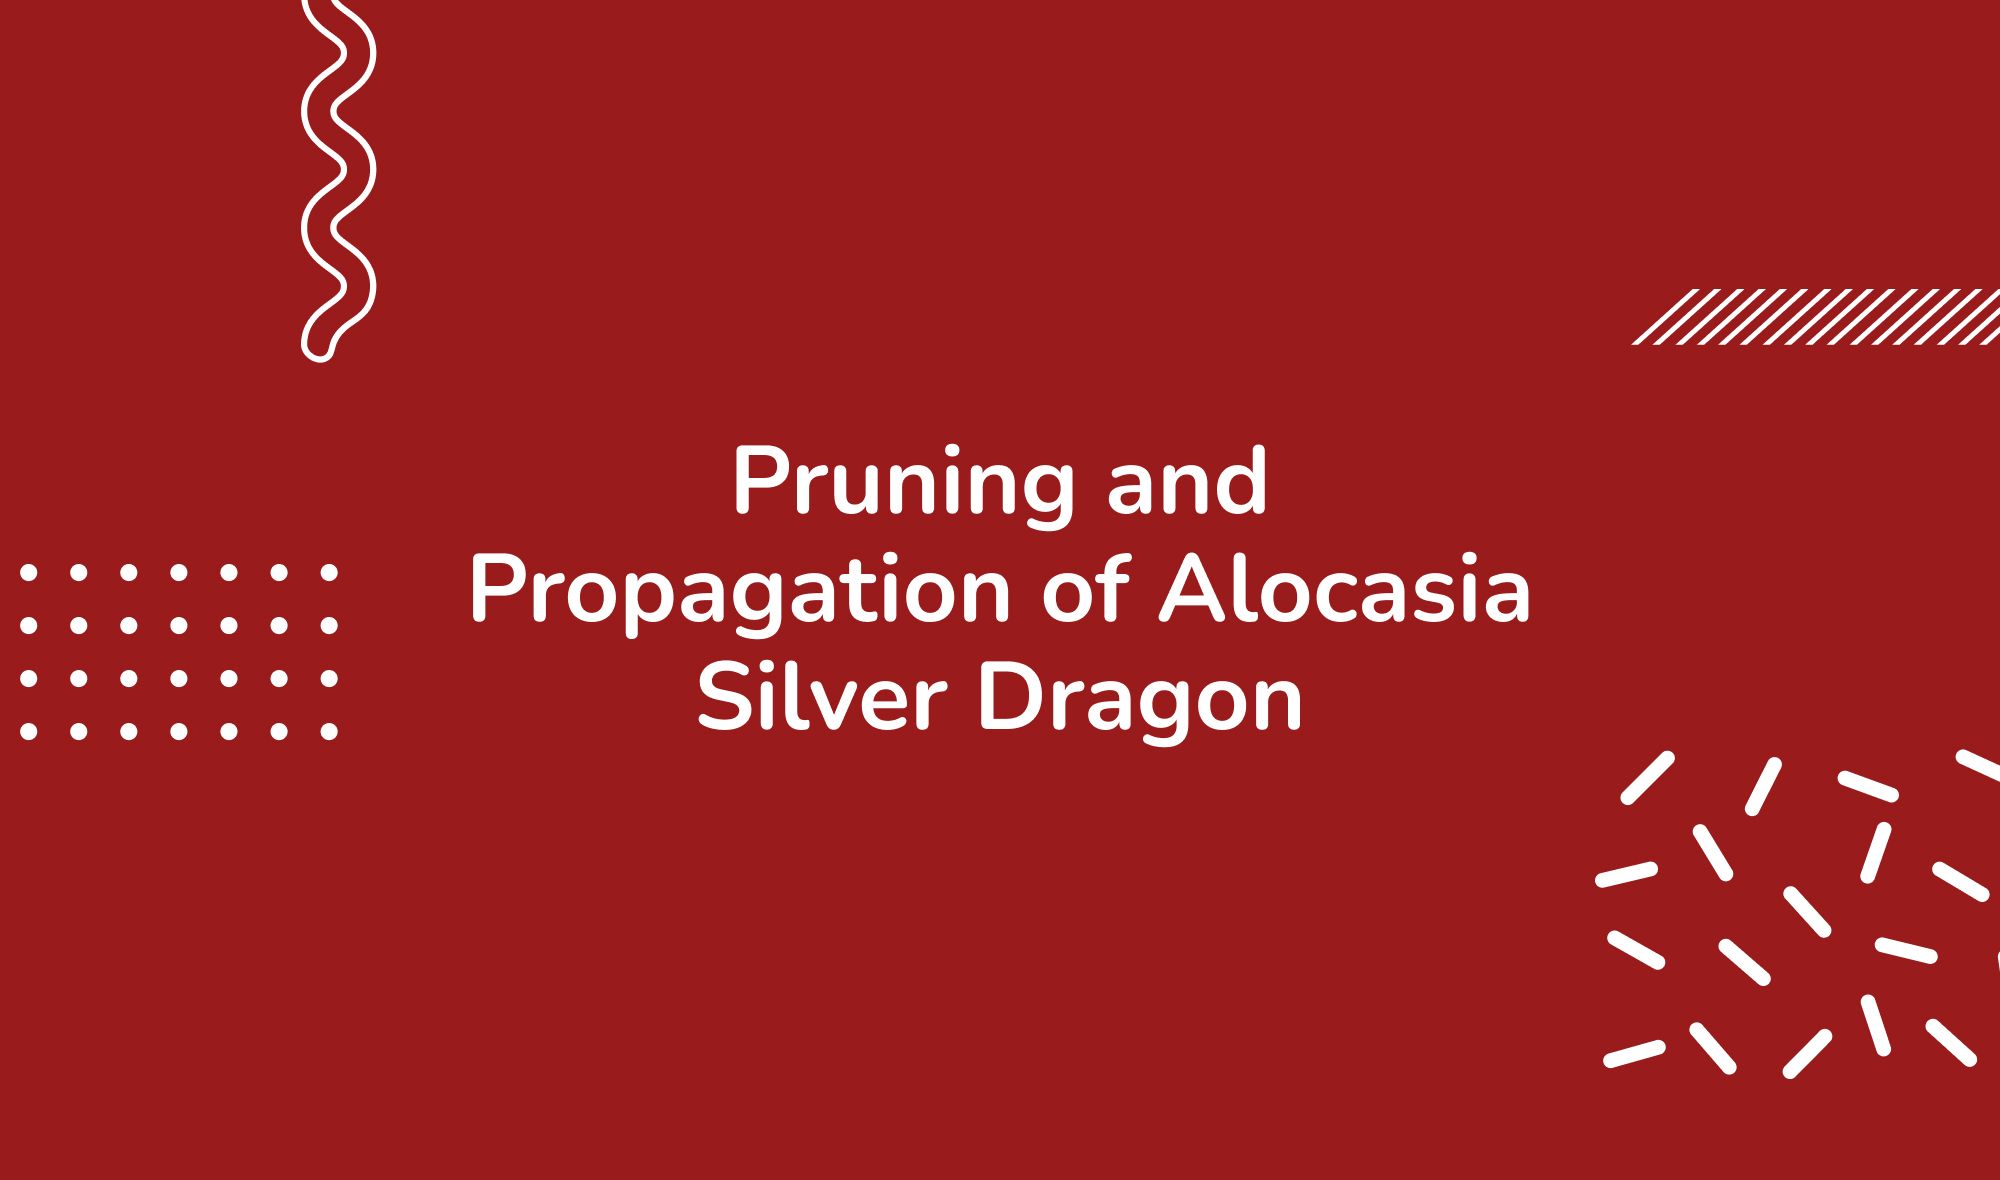 Pruning and Propagation of Alocasia Silver Dragon